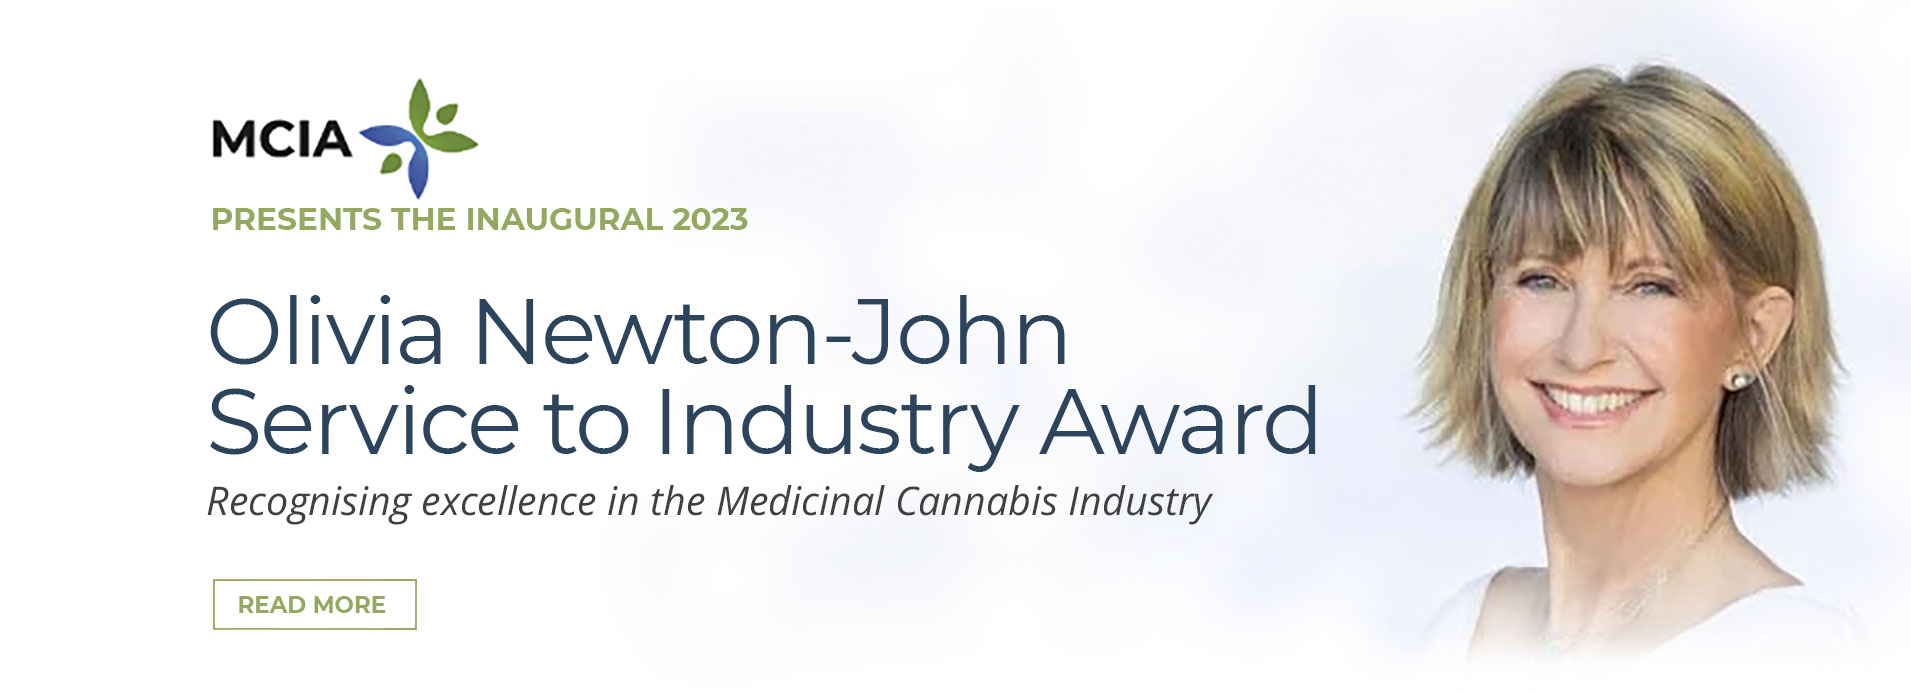 MCIA presents the inaugural 2023 - Olivia Newton-John Service to Industry Award. Recognising excellence in the Medicinal Cannabis Industry 